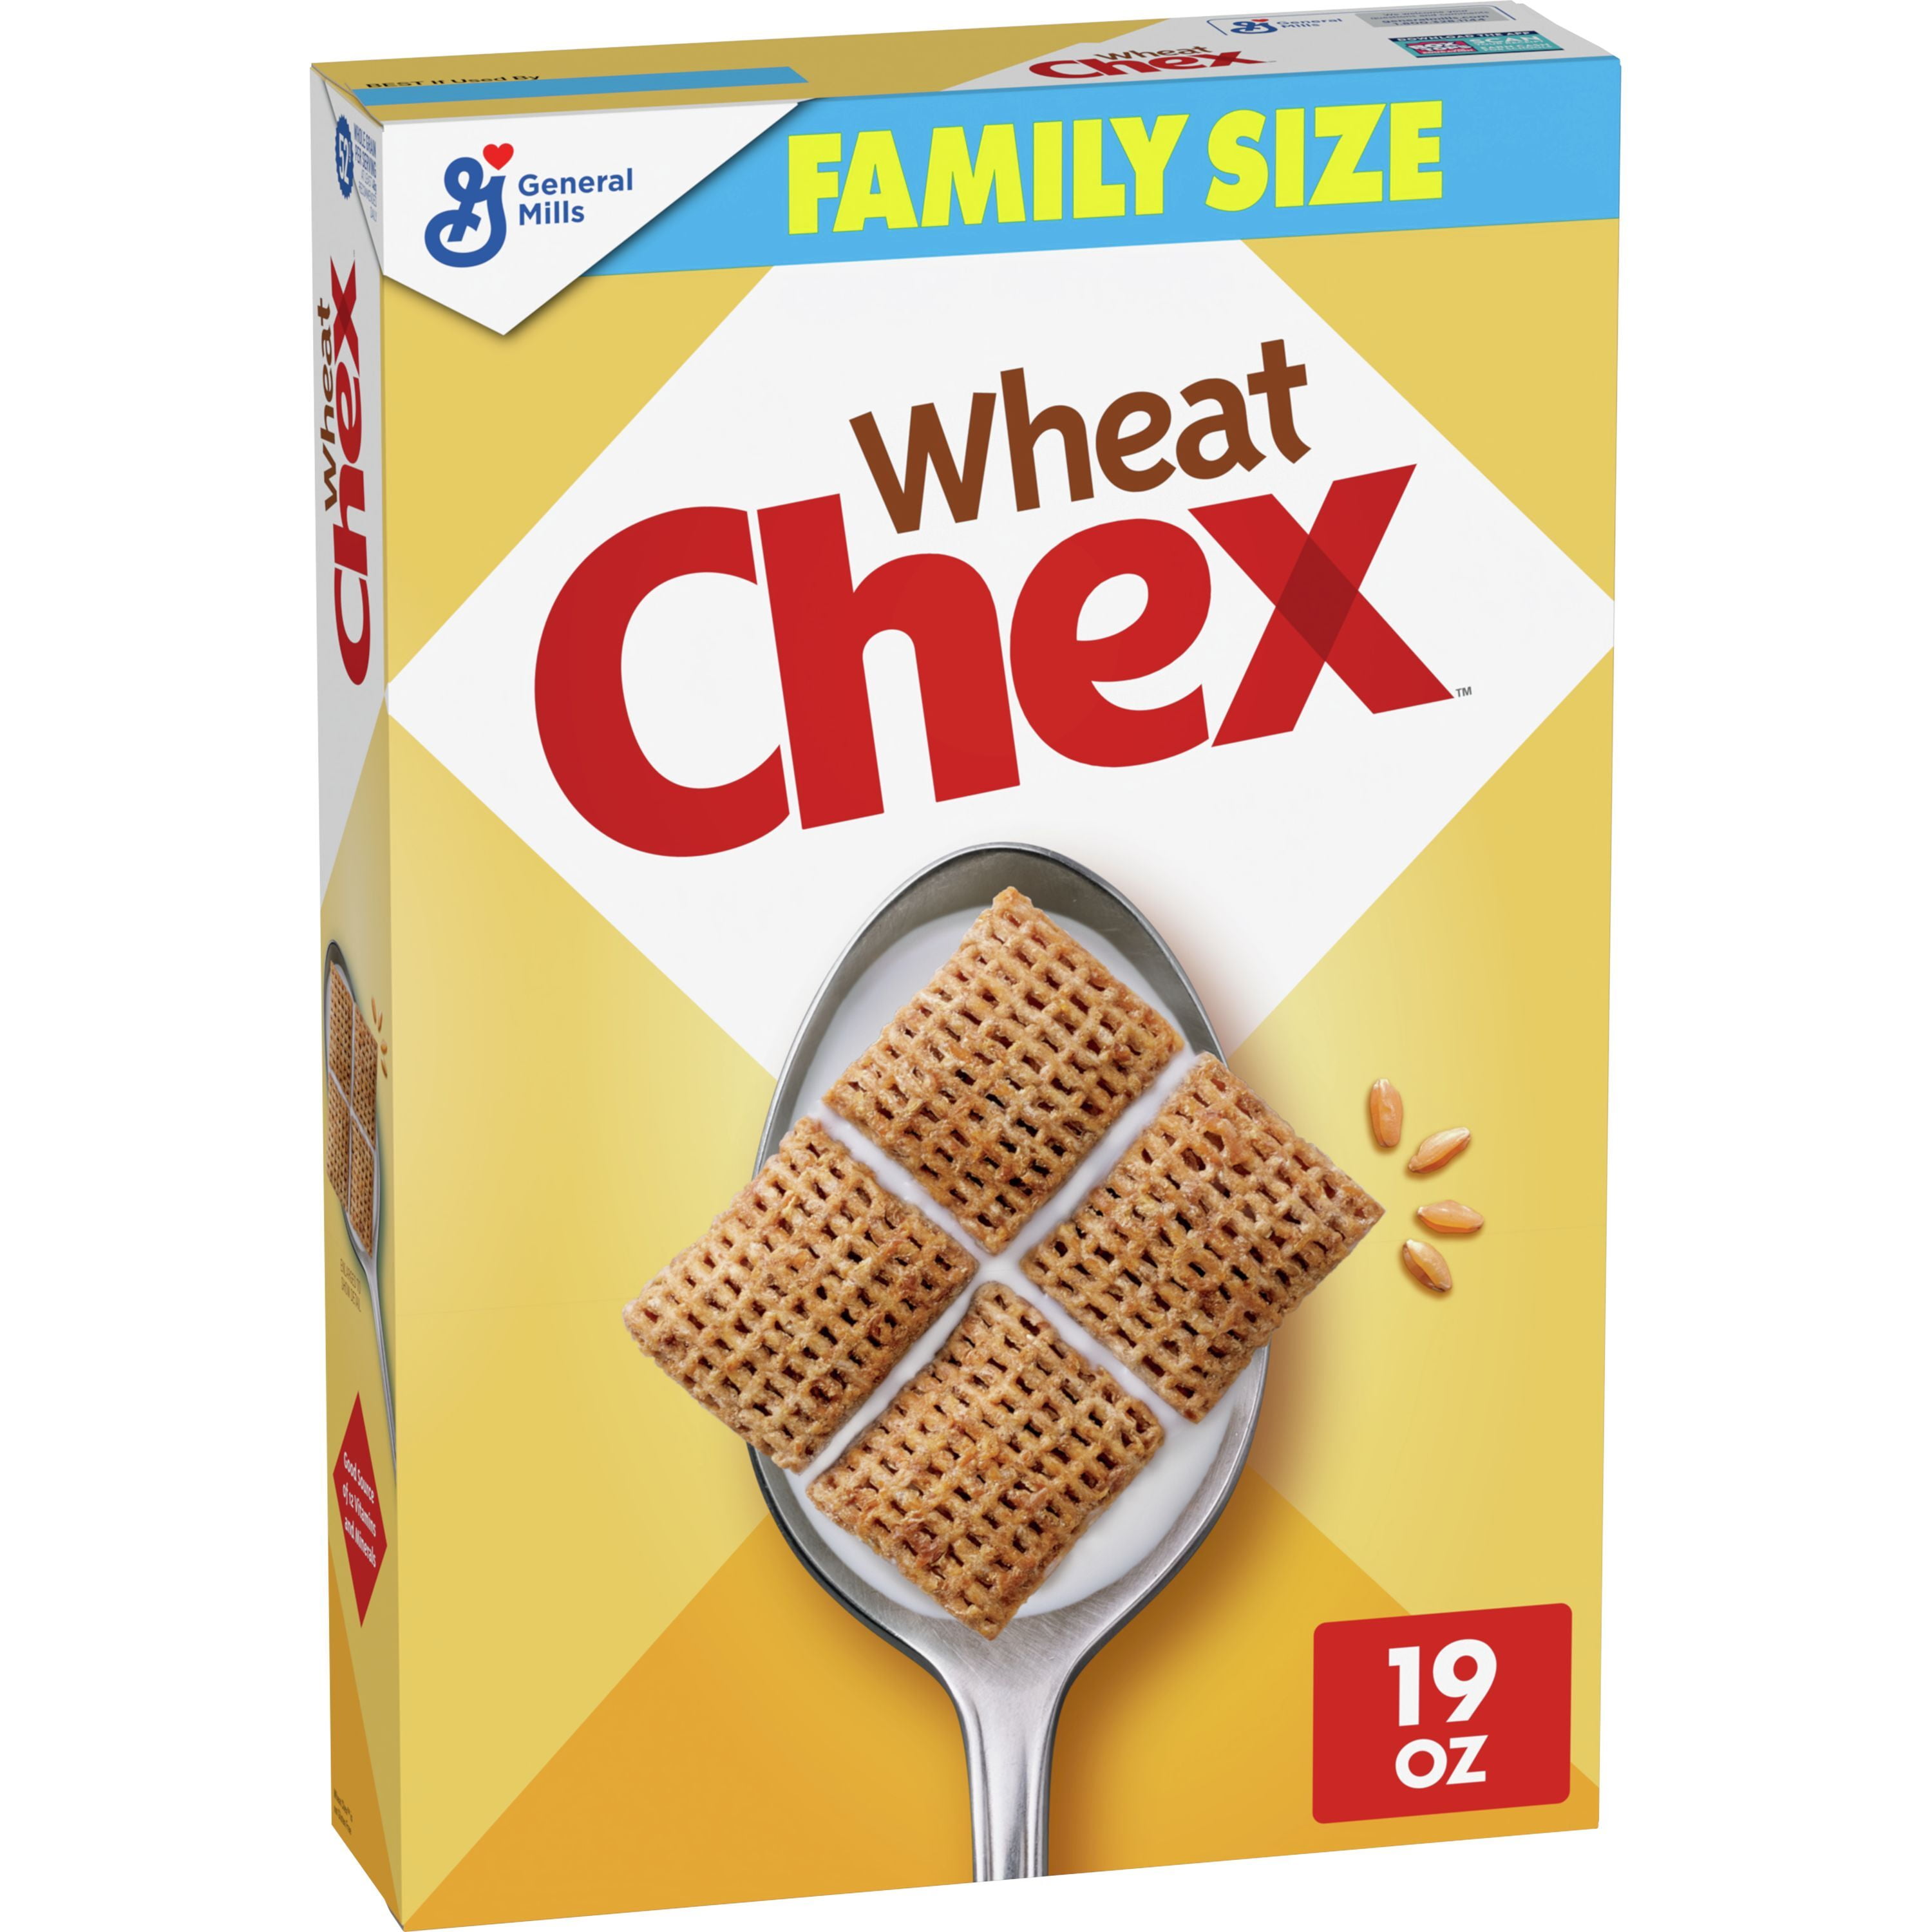 Wheat Chex Breakfast Cereal, Made with Whole Grain, Family Size, 19 OZ